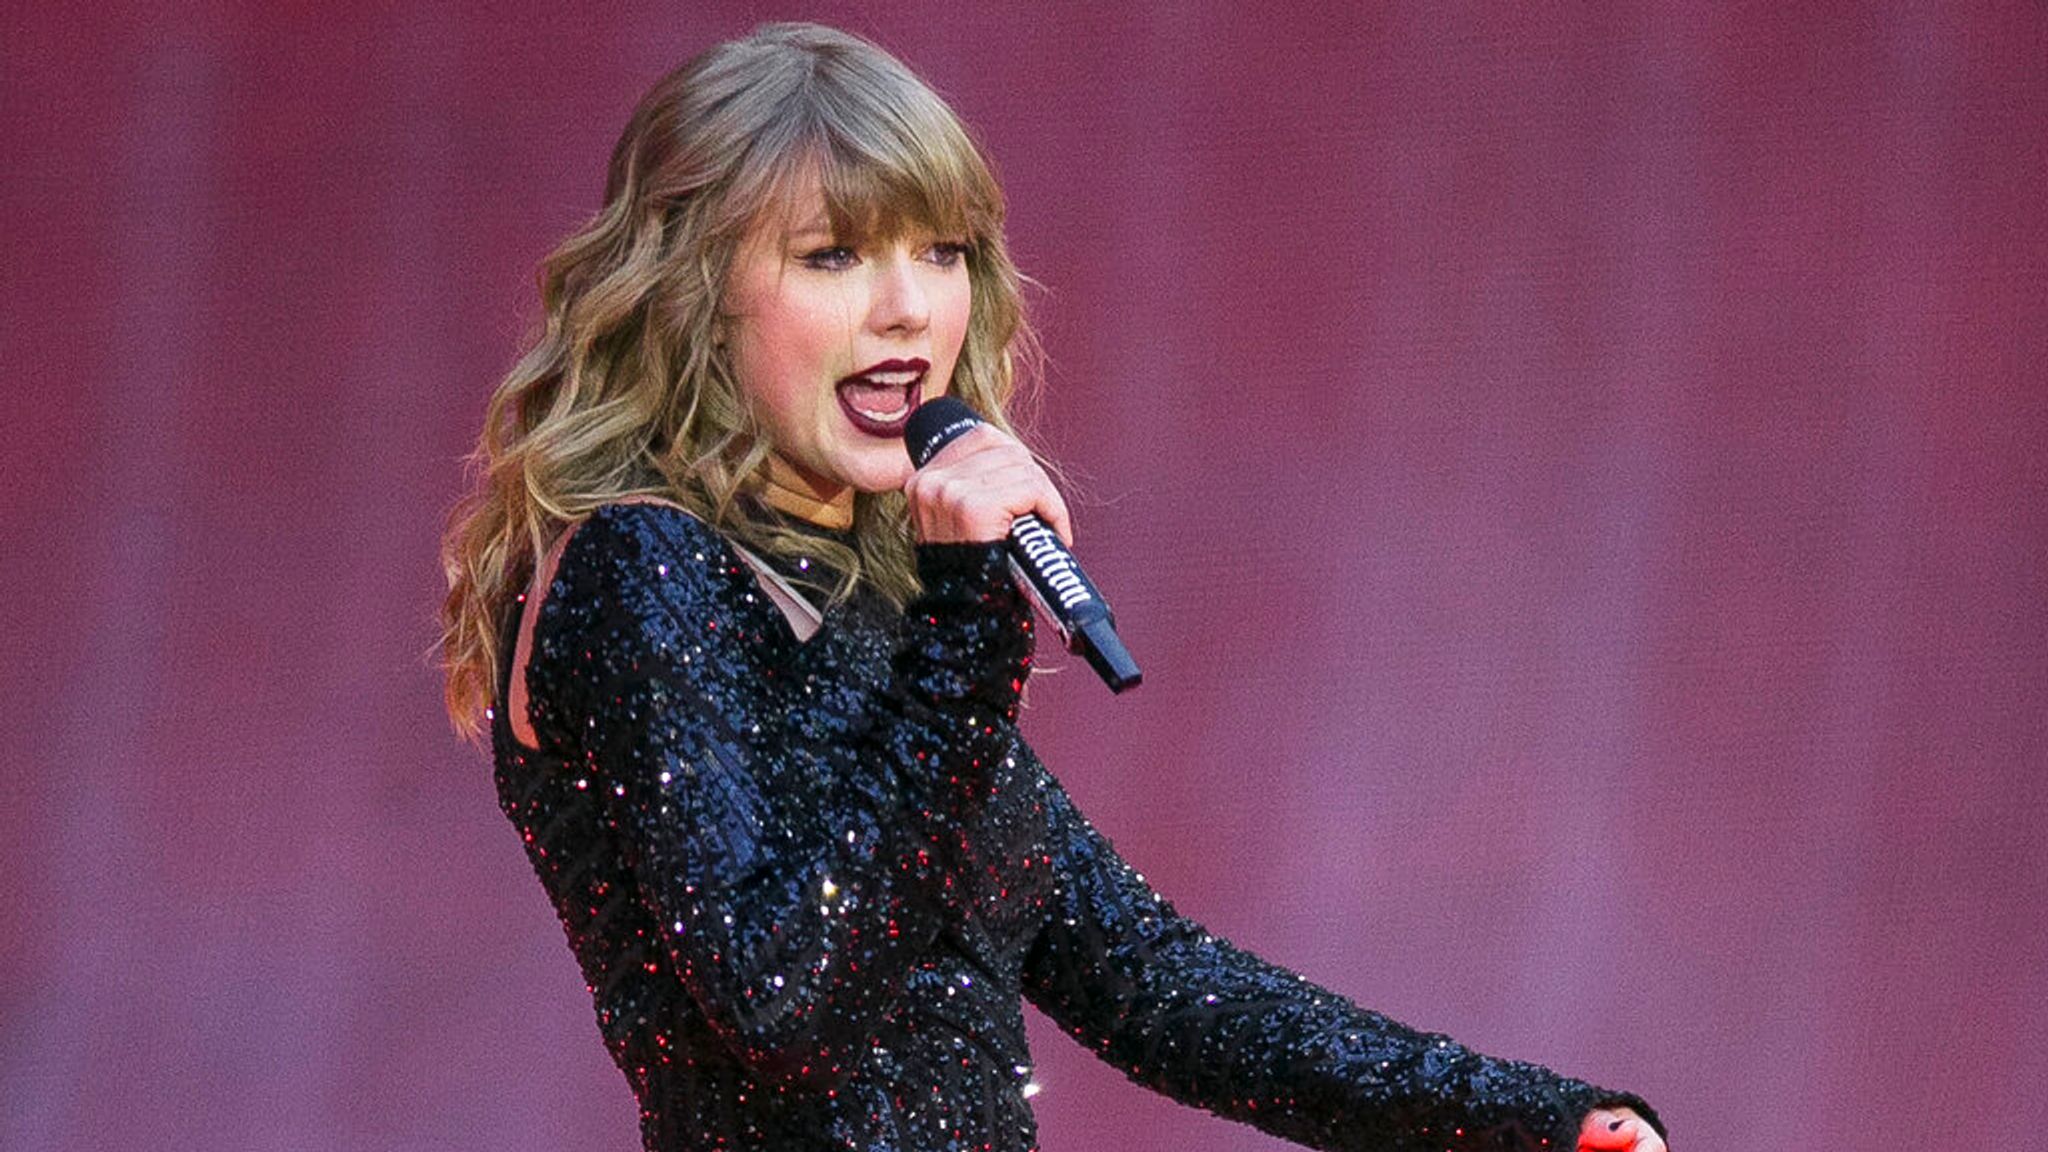 Lawmakers tell Live Nation CEO they want answers on the Taylor Swift Ticketmaster fiasco